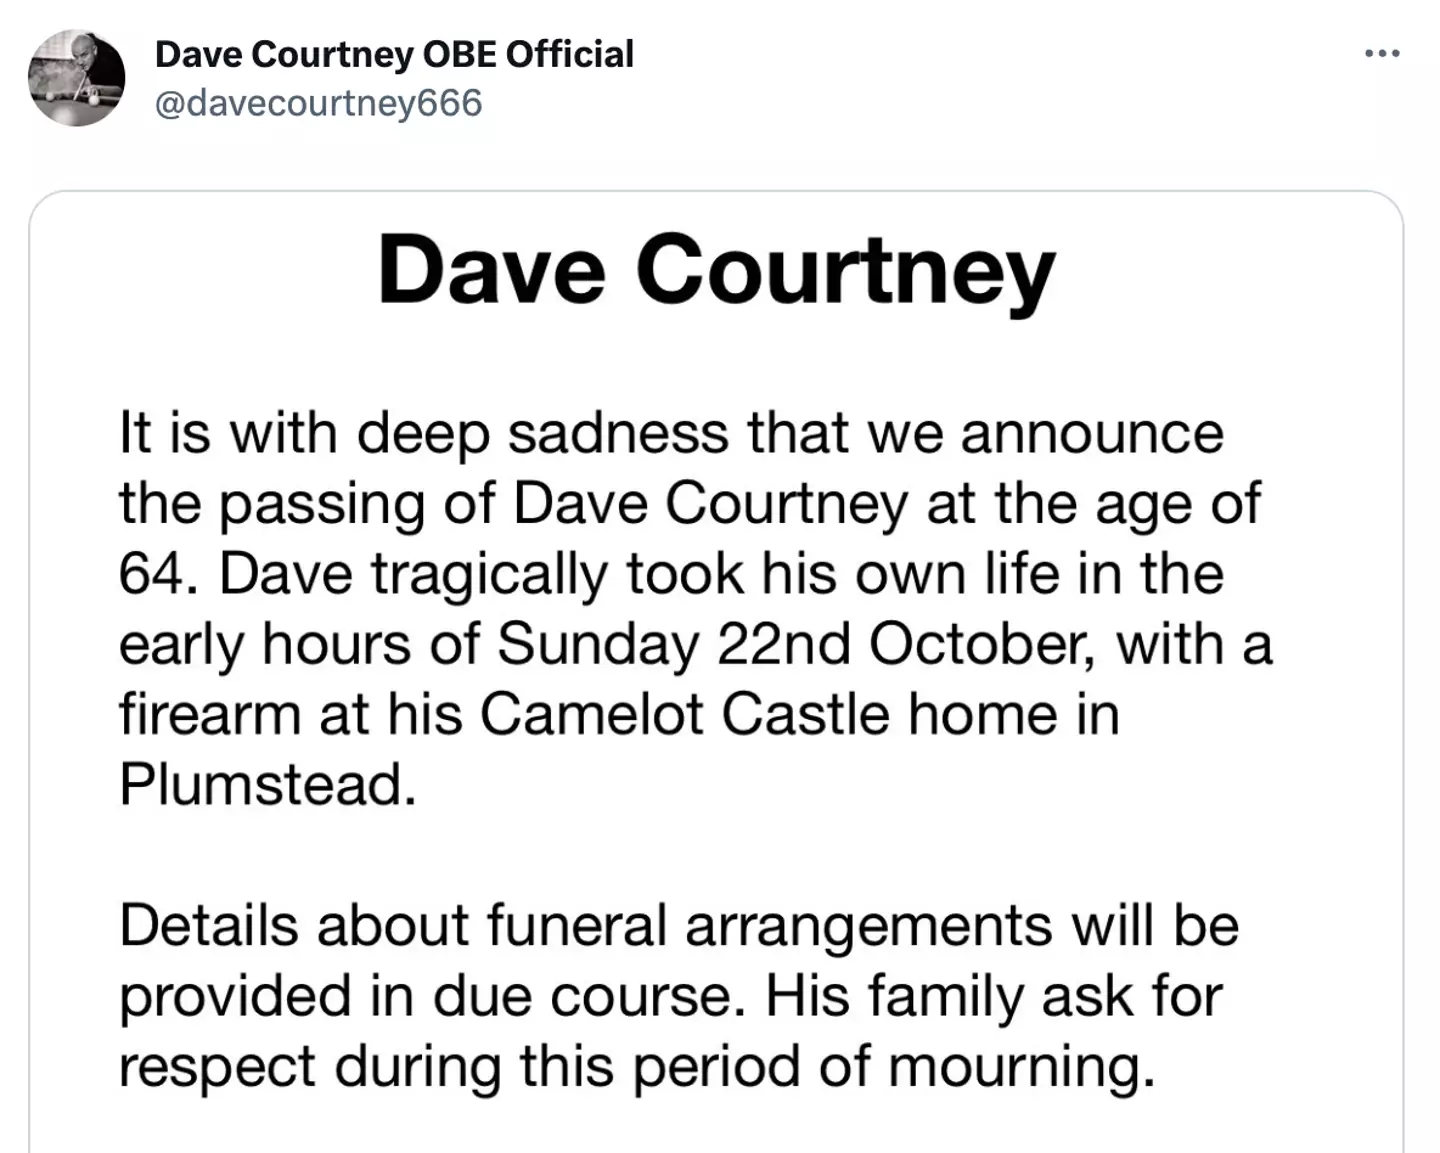 East Ender Dave Courtney has passed away at the age of 64.